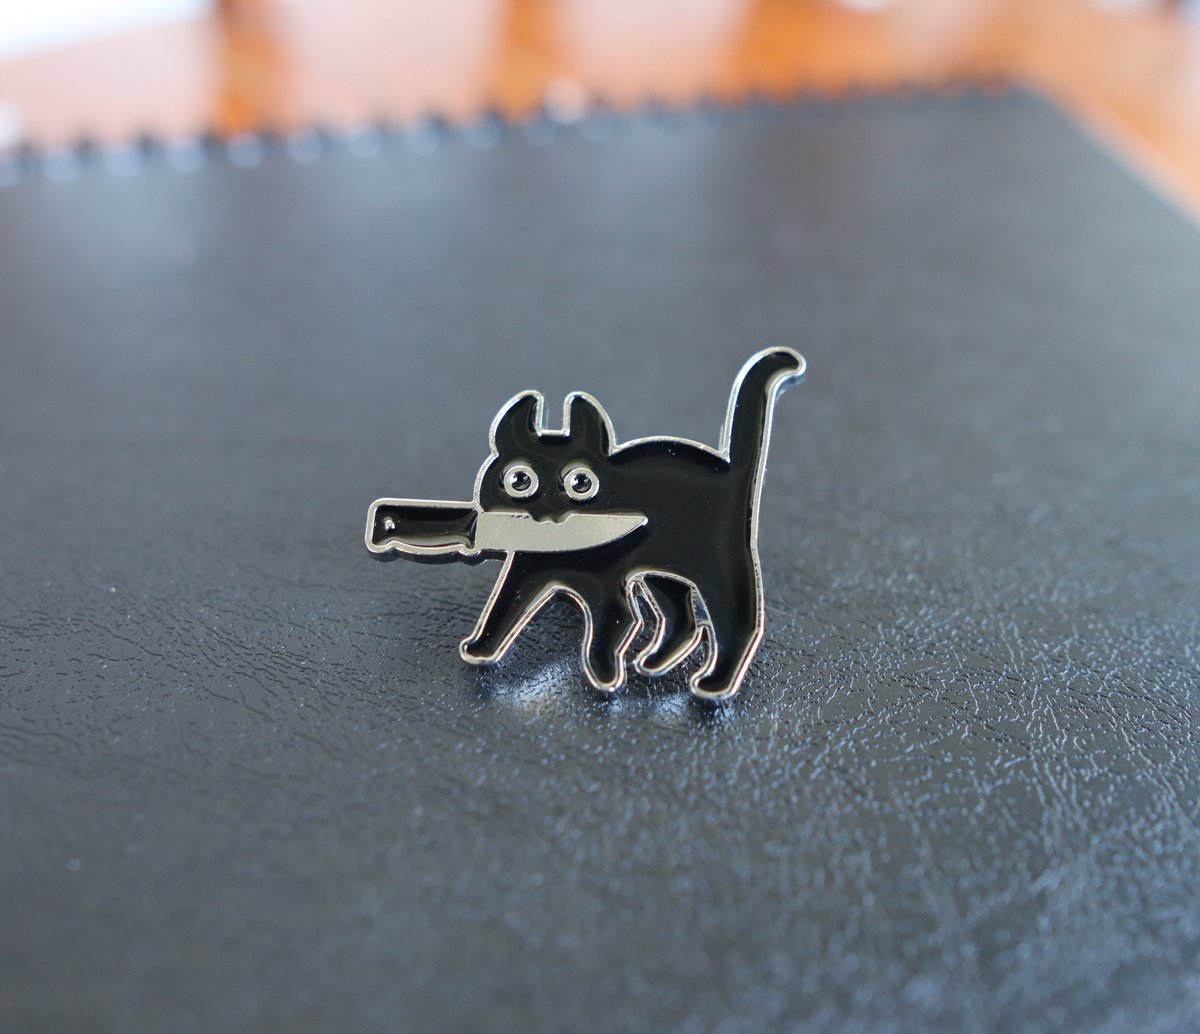 @clairewbear Do you like Black Cats? #BlackCatCoven I'm putting together a spooky set for Halloween and also a set for #CatLovers and #BlackCat guardians!